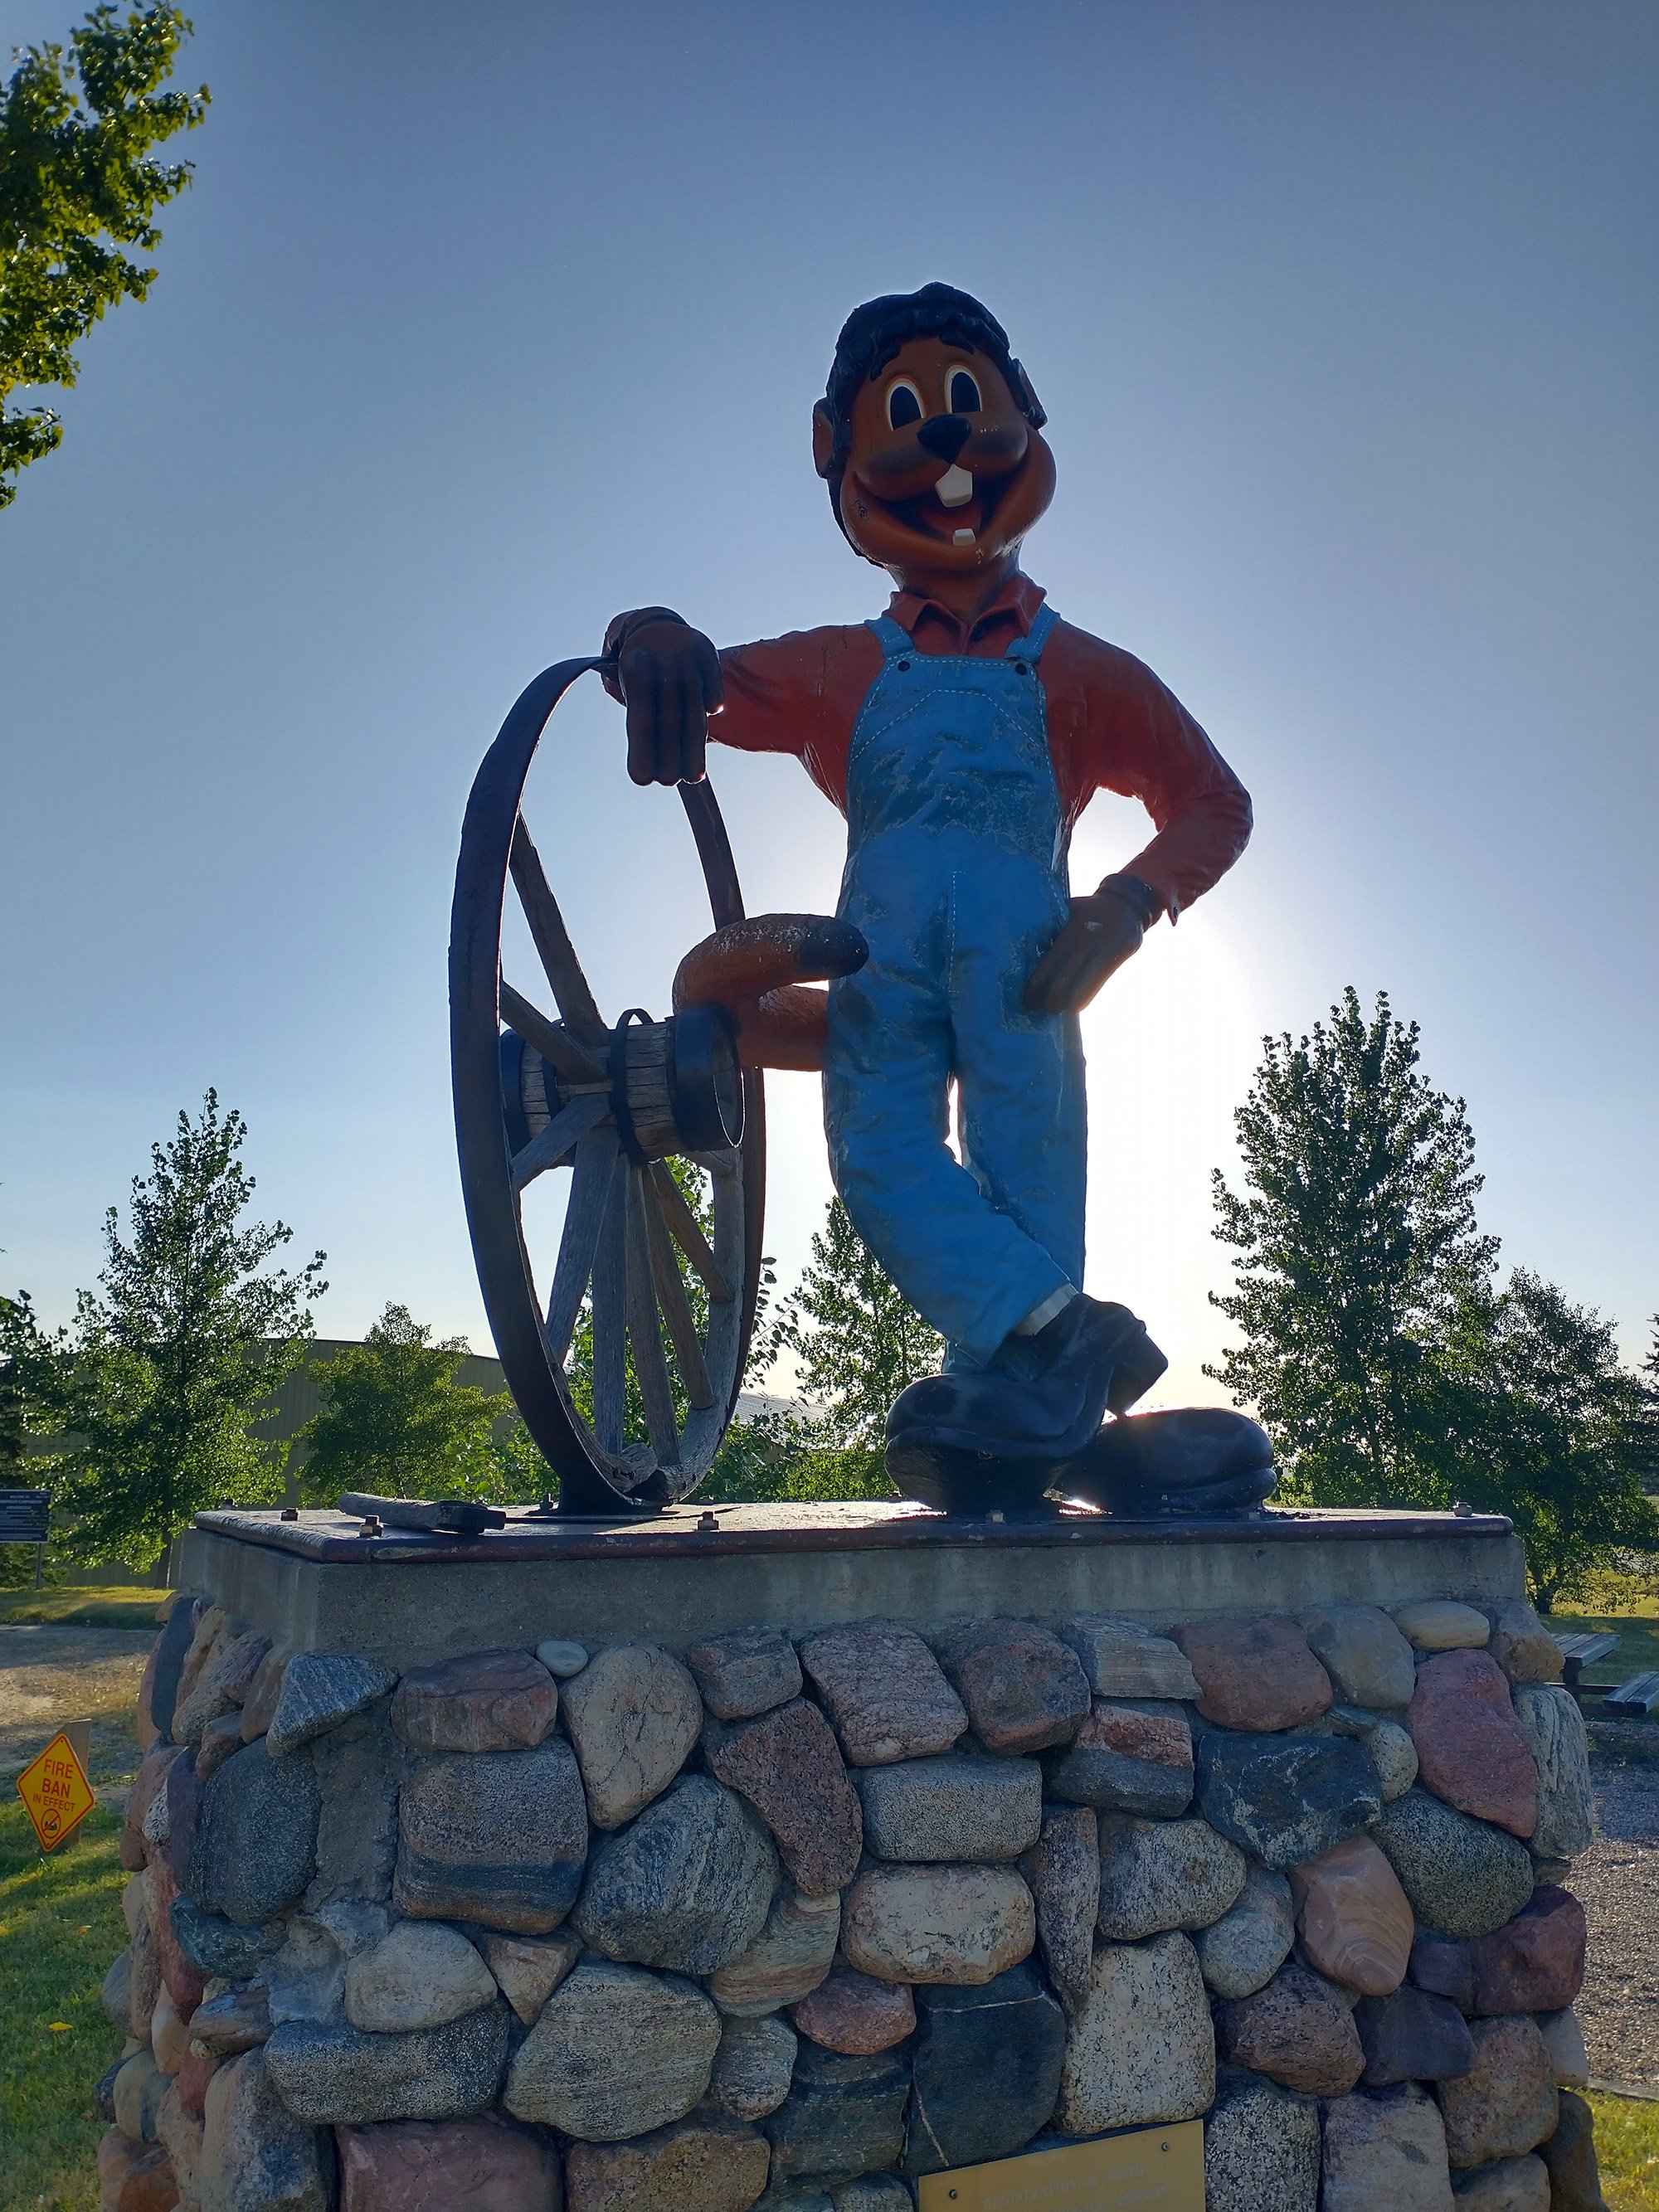 Clem T. Gofur, the Mascot of Torrington. Some kind of camping town with a "Gopher Hole Museum"....?